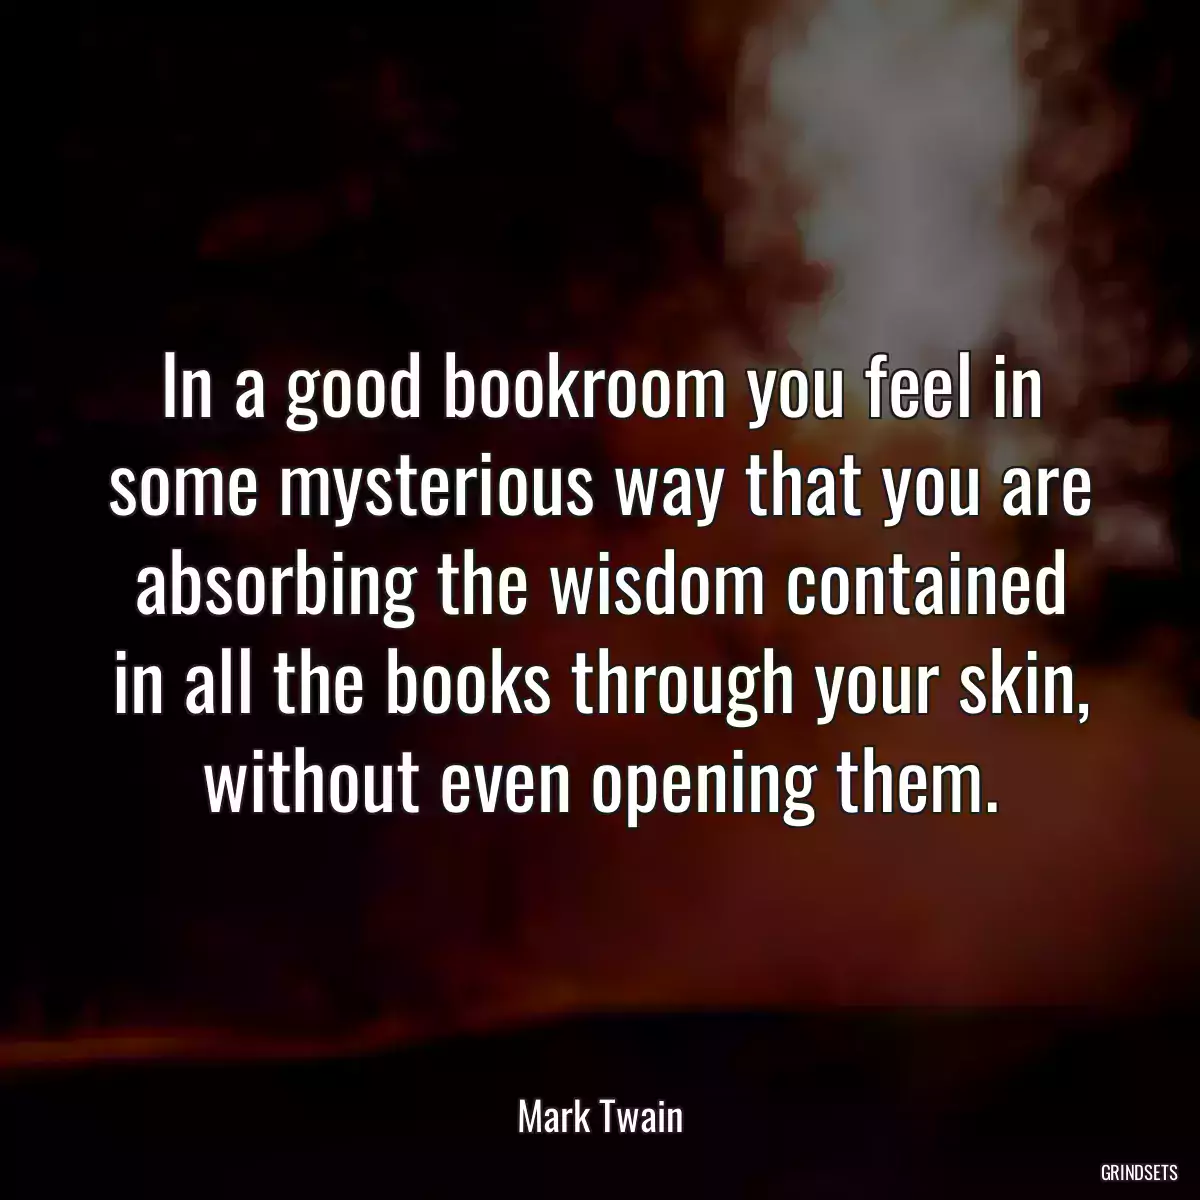 In a good bookroom you feel in some mysterious way that you are absorbing the wisdom contained in all the books through your skin, without even opening them.